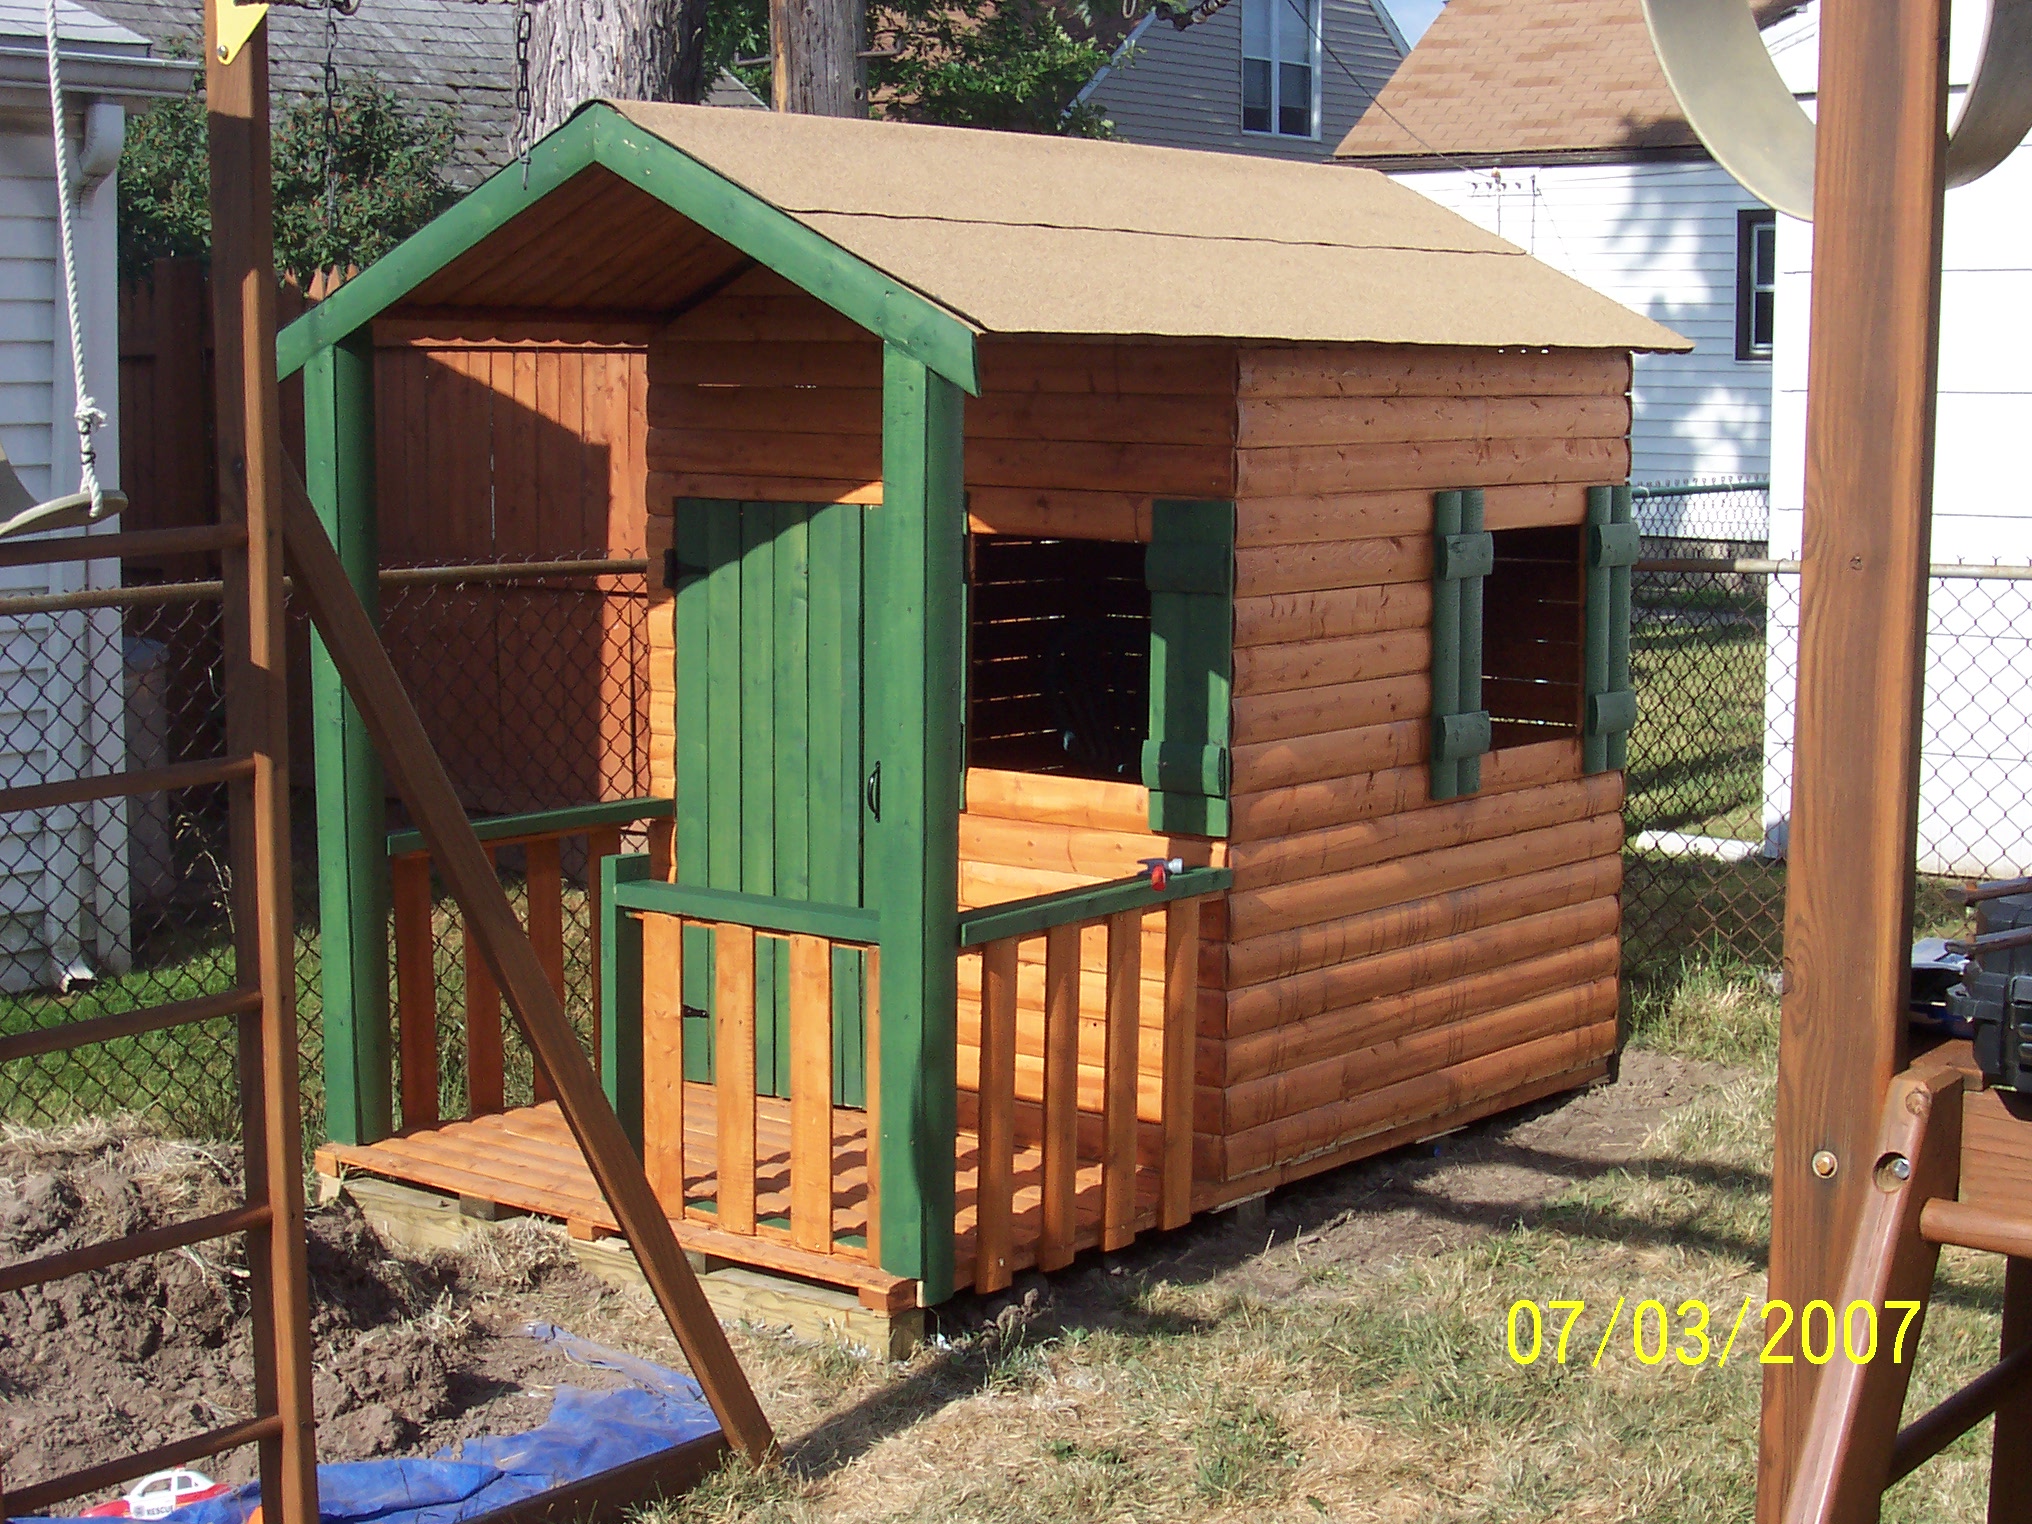 Build a log cabin Playhouse for under $300